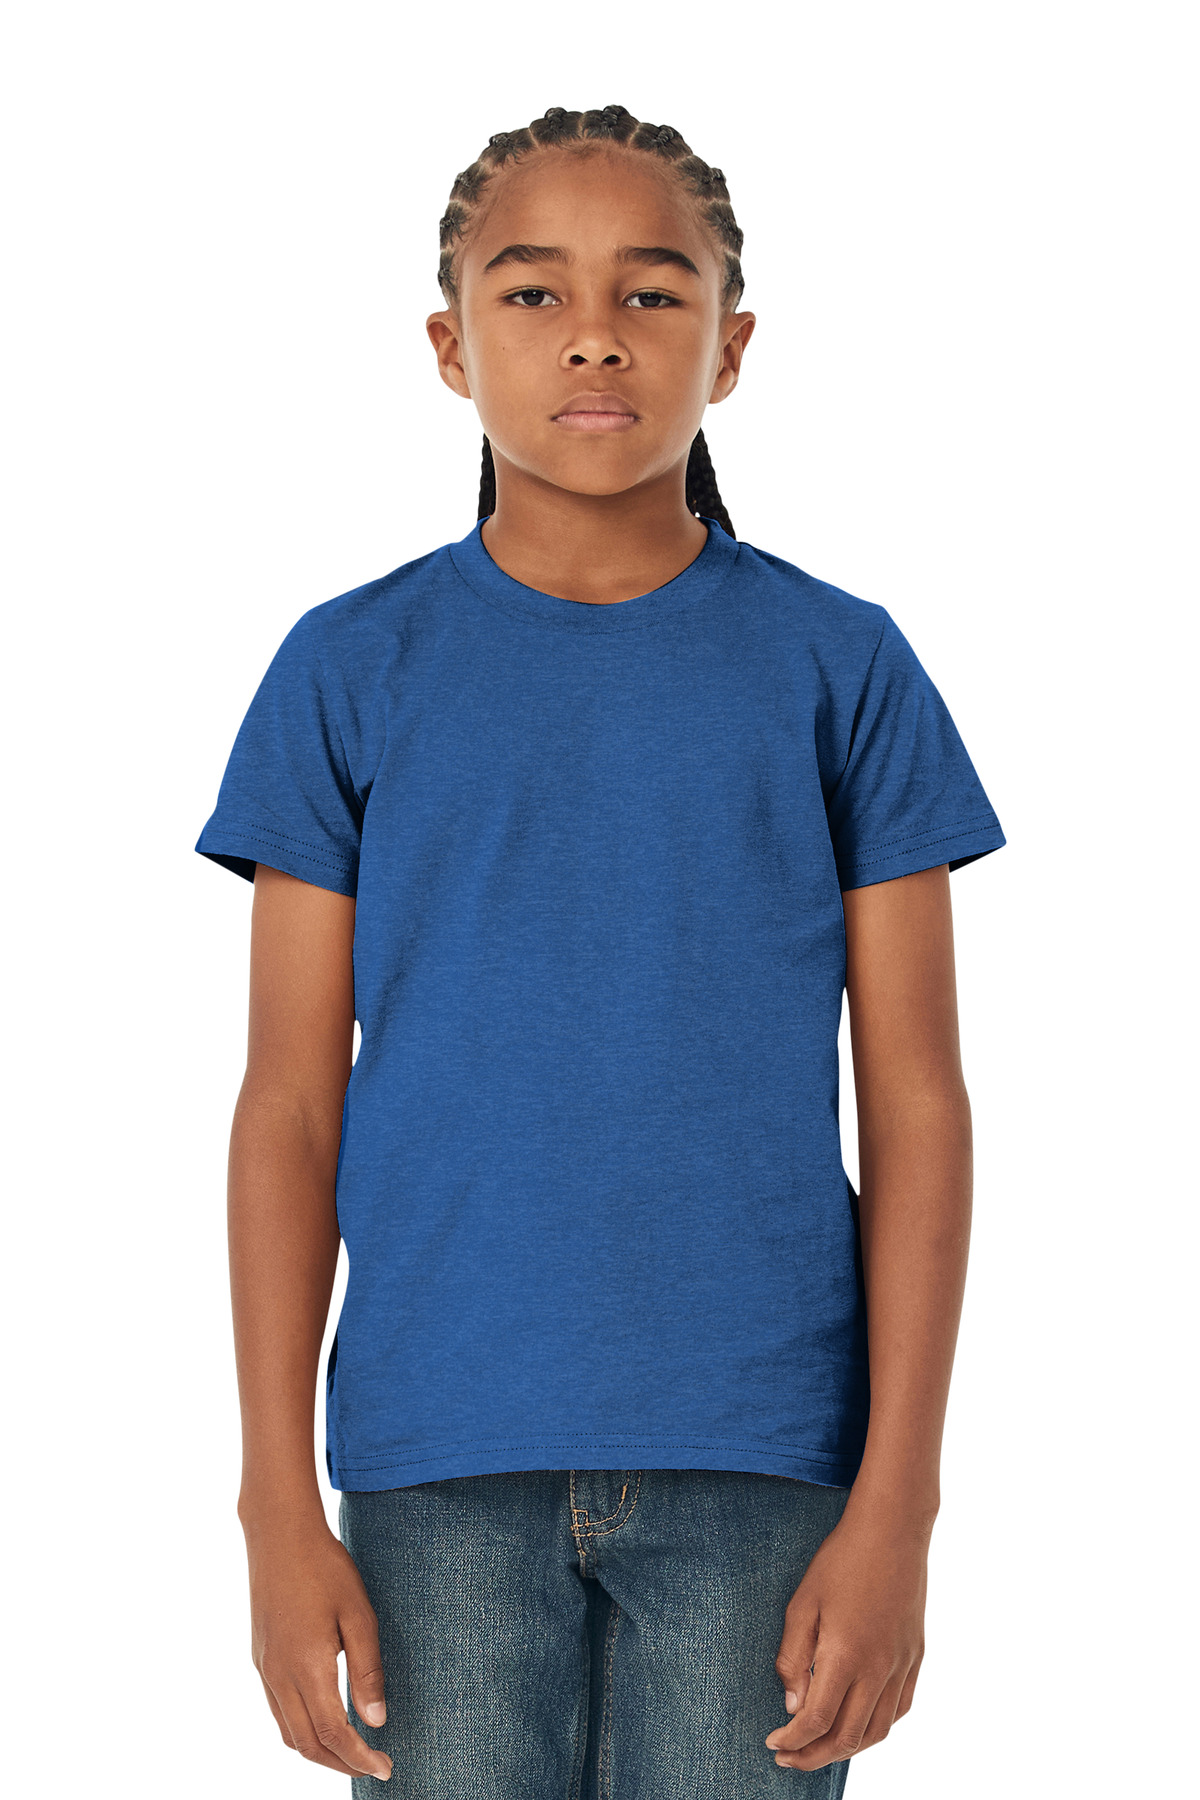 BELLA+CANVAS  Youth Jersey Short Sleeve Tee. BC3001Y